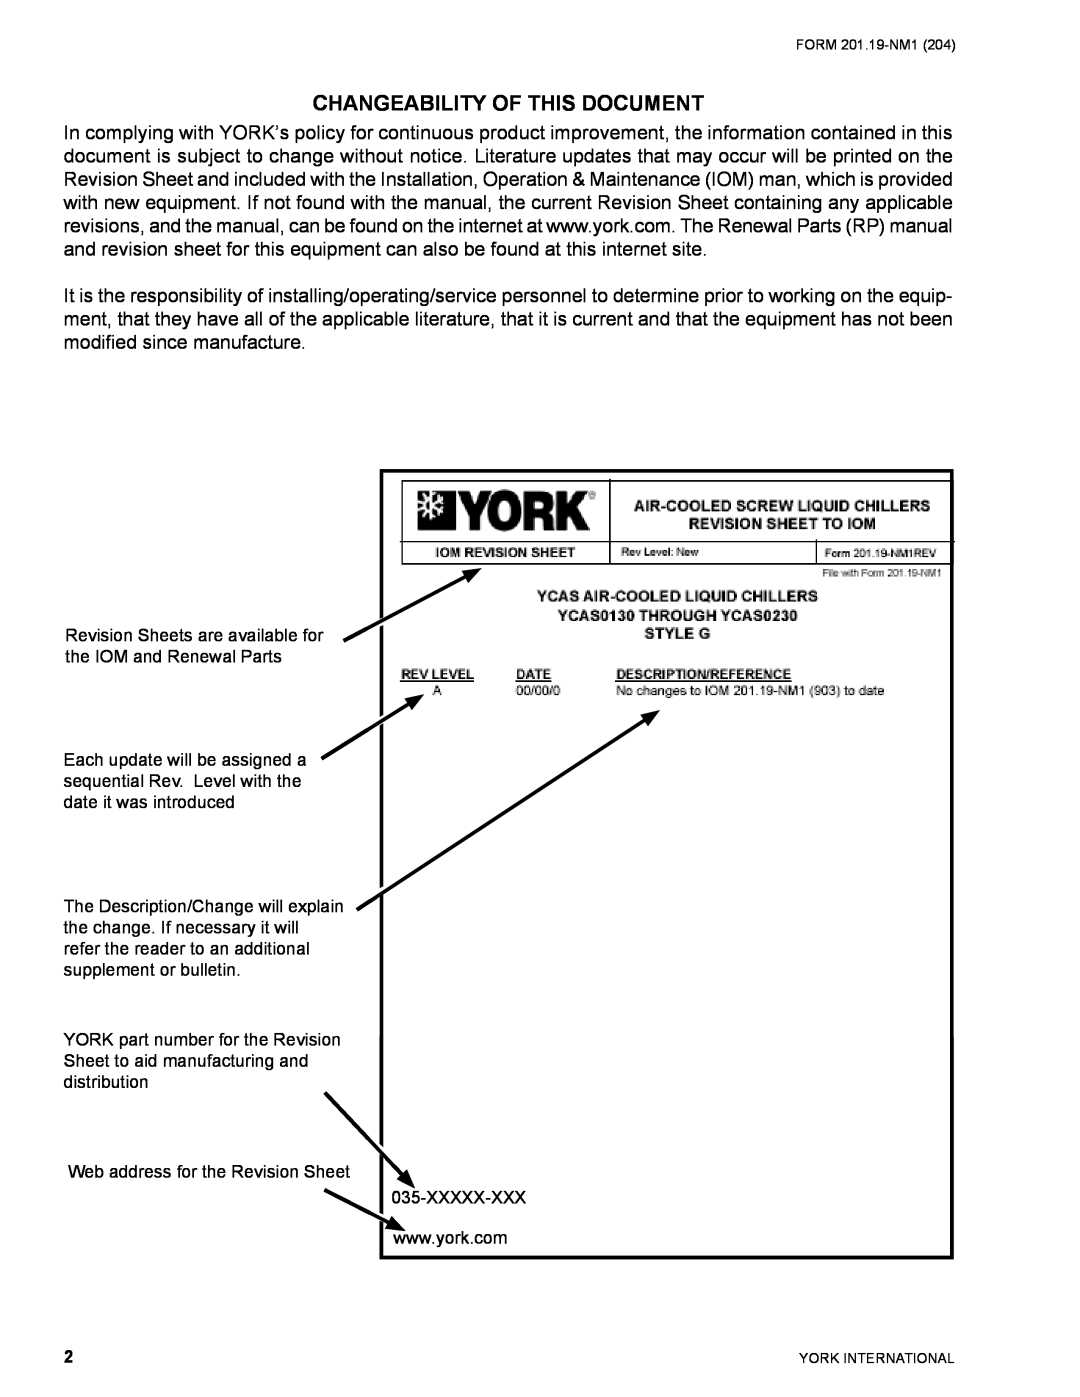 York YCAS0130 manual Changeability Of This Document 